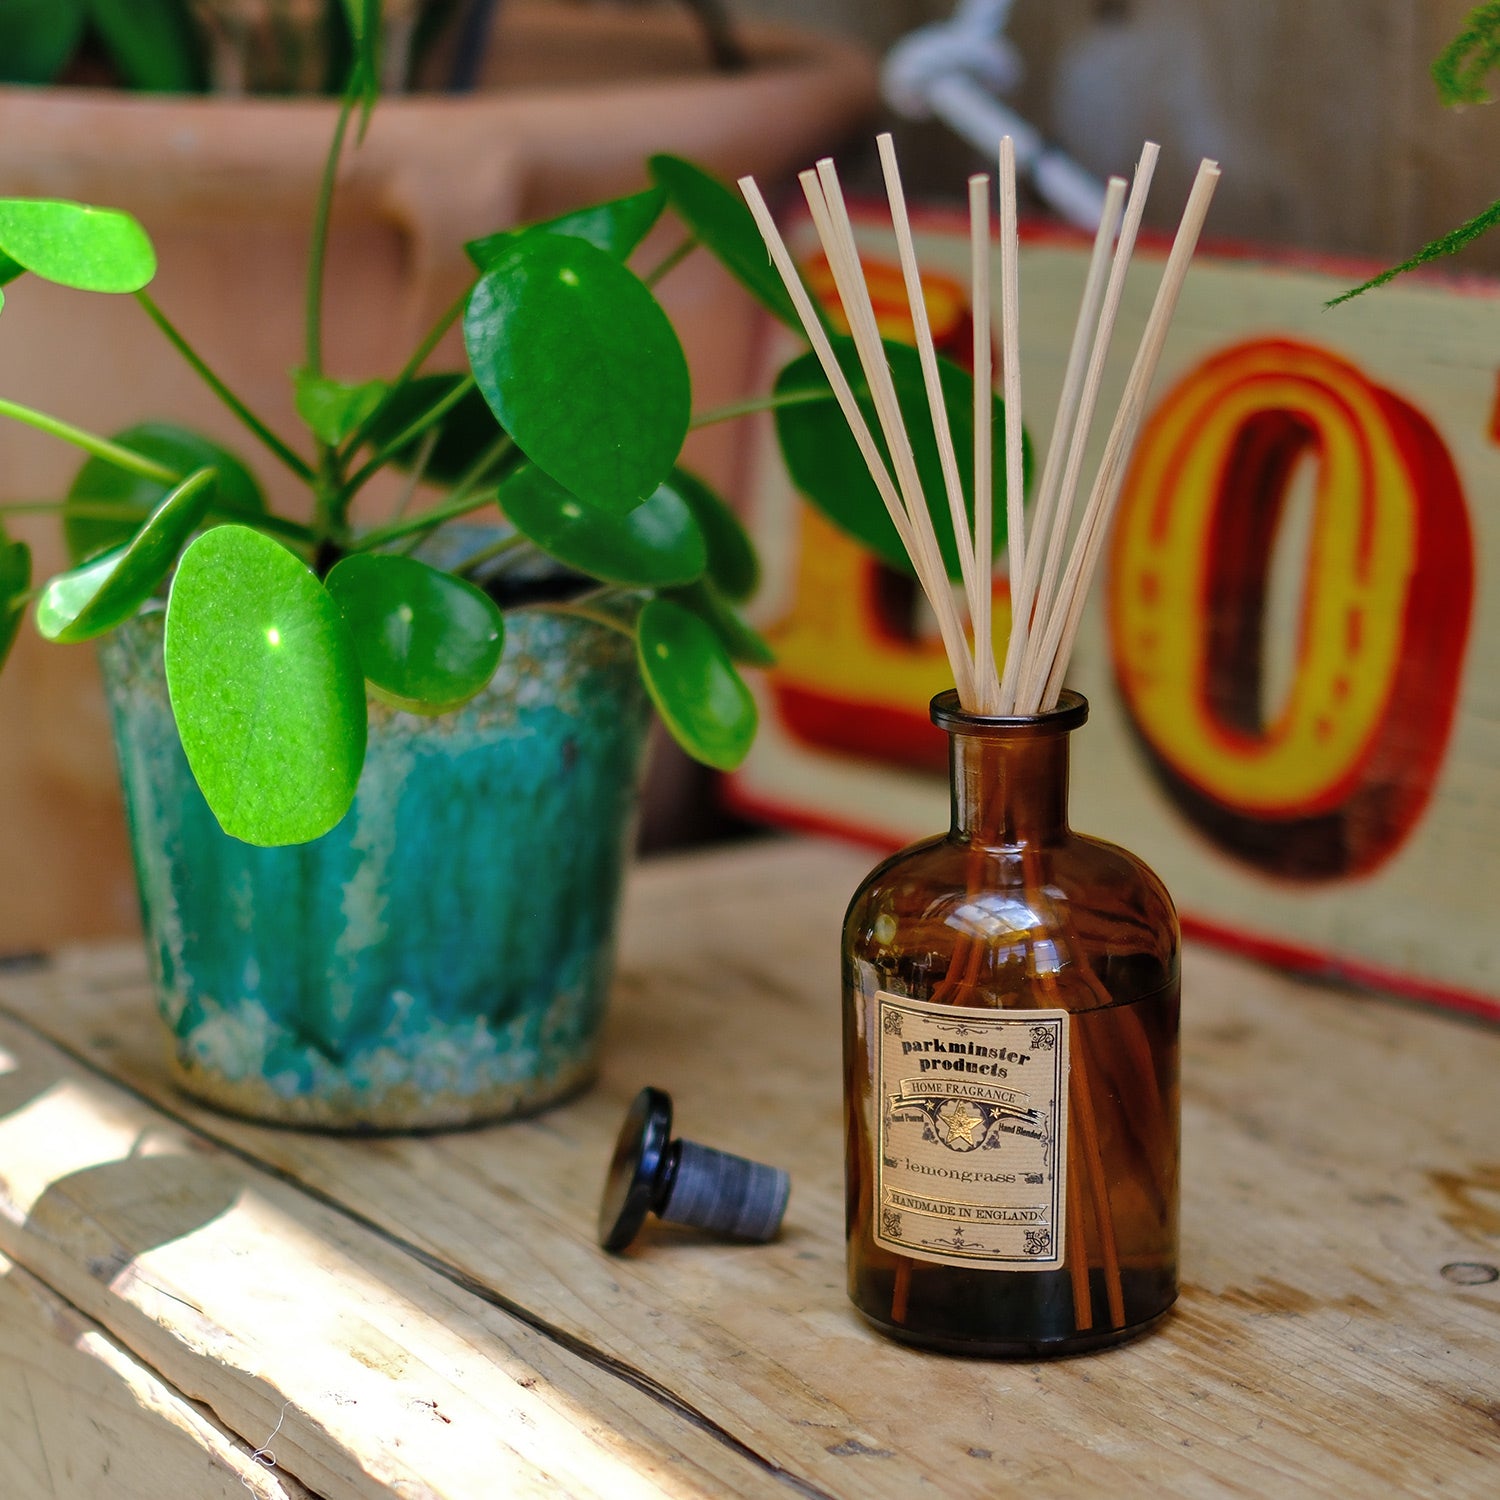 200ml Lemongrass Reed Diffuser by Parkminster Home Fragrance, made with pure 100% essential oils, from the Apothecary Collection, crafted in Cornwall